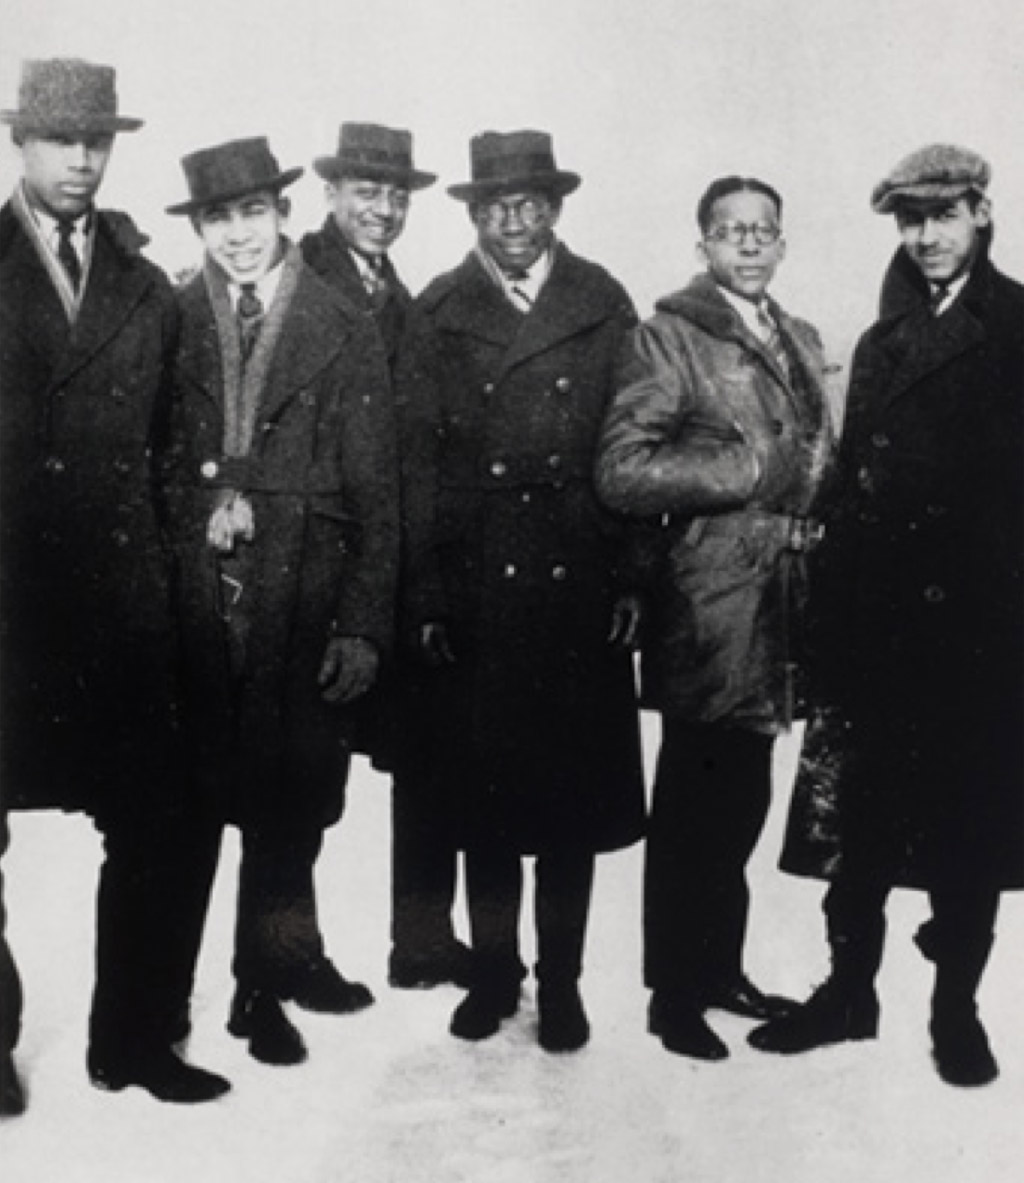 Six African American Amherst students pose for a photo in 1923